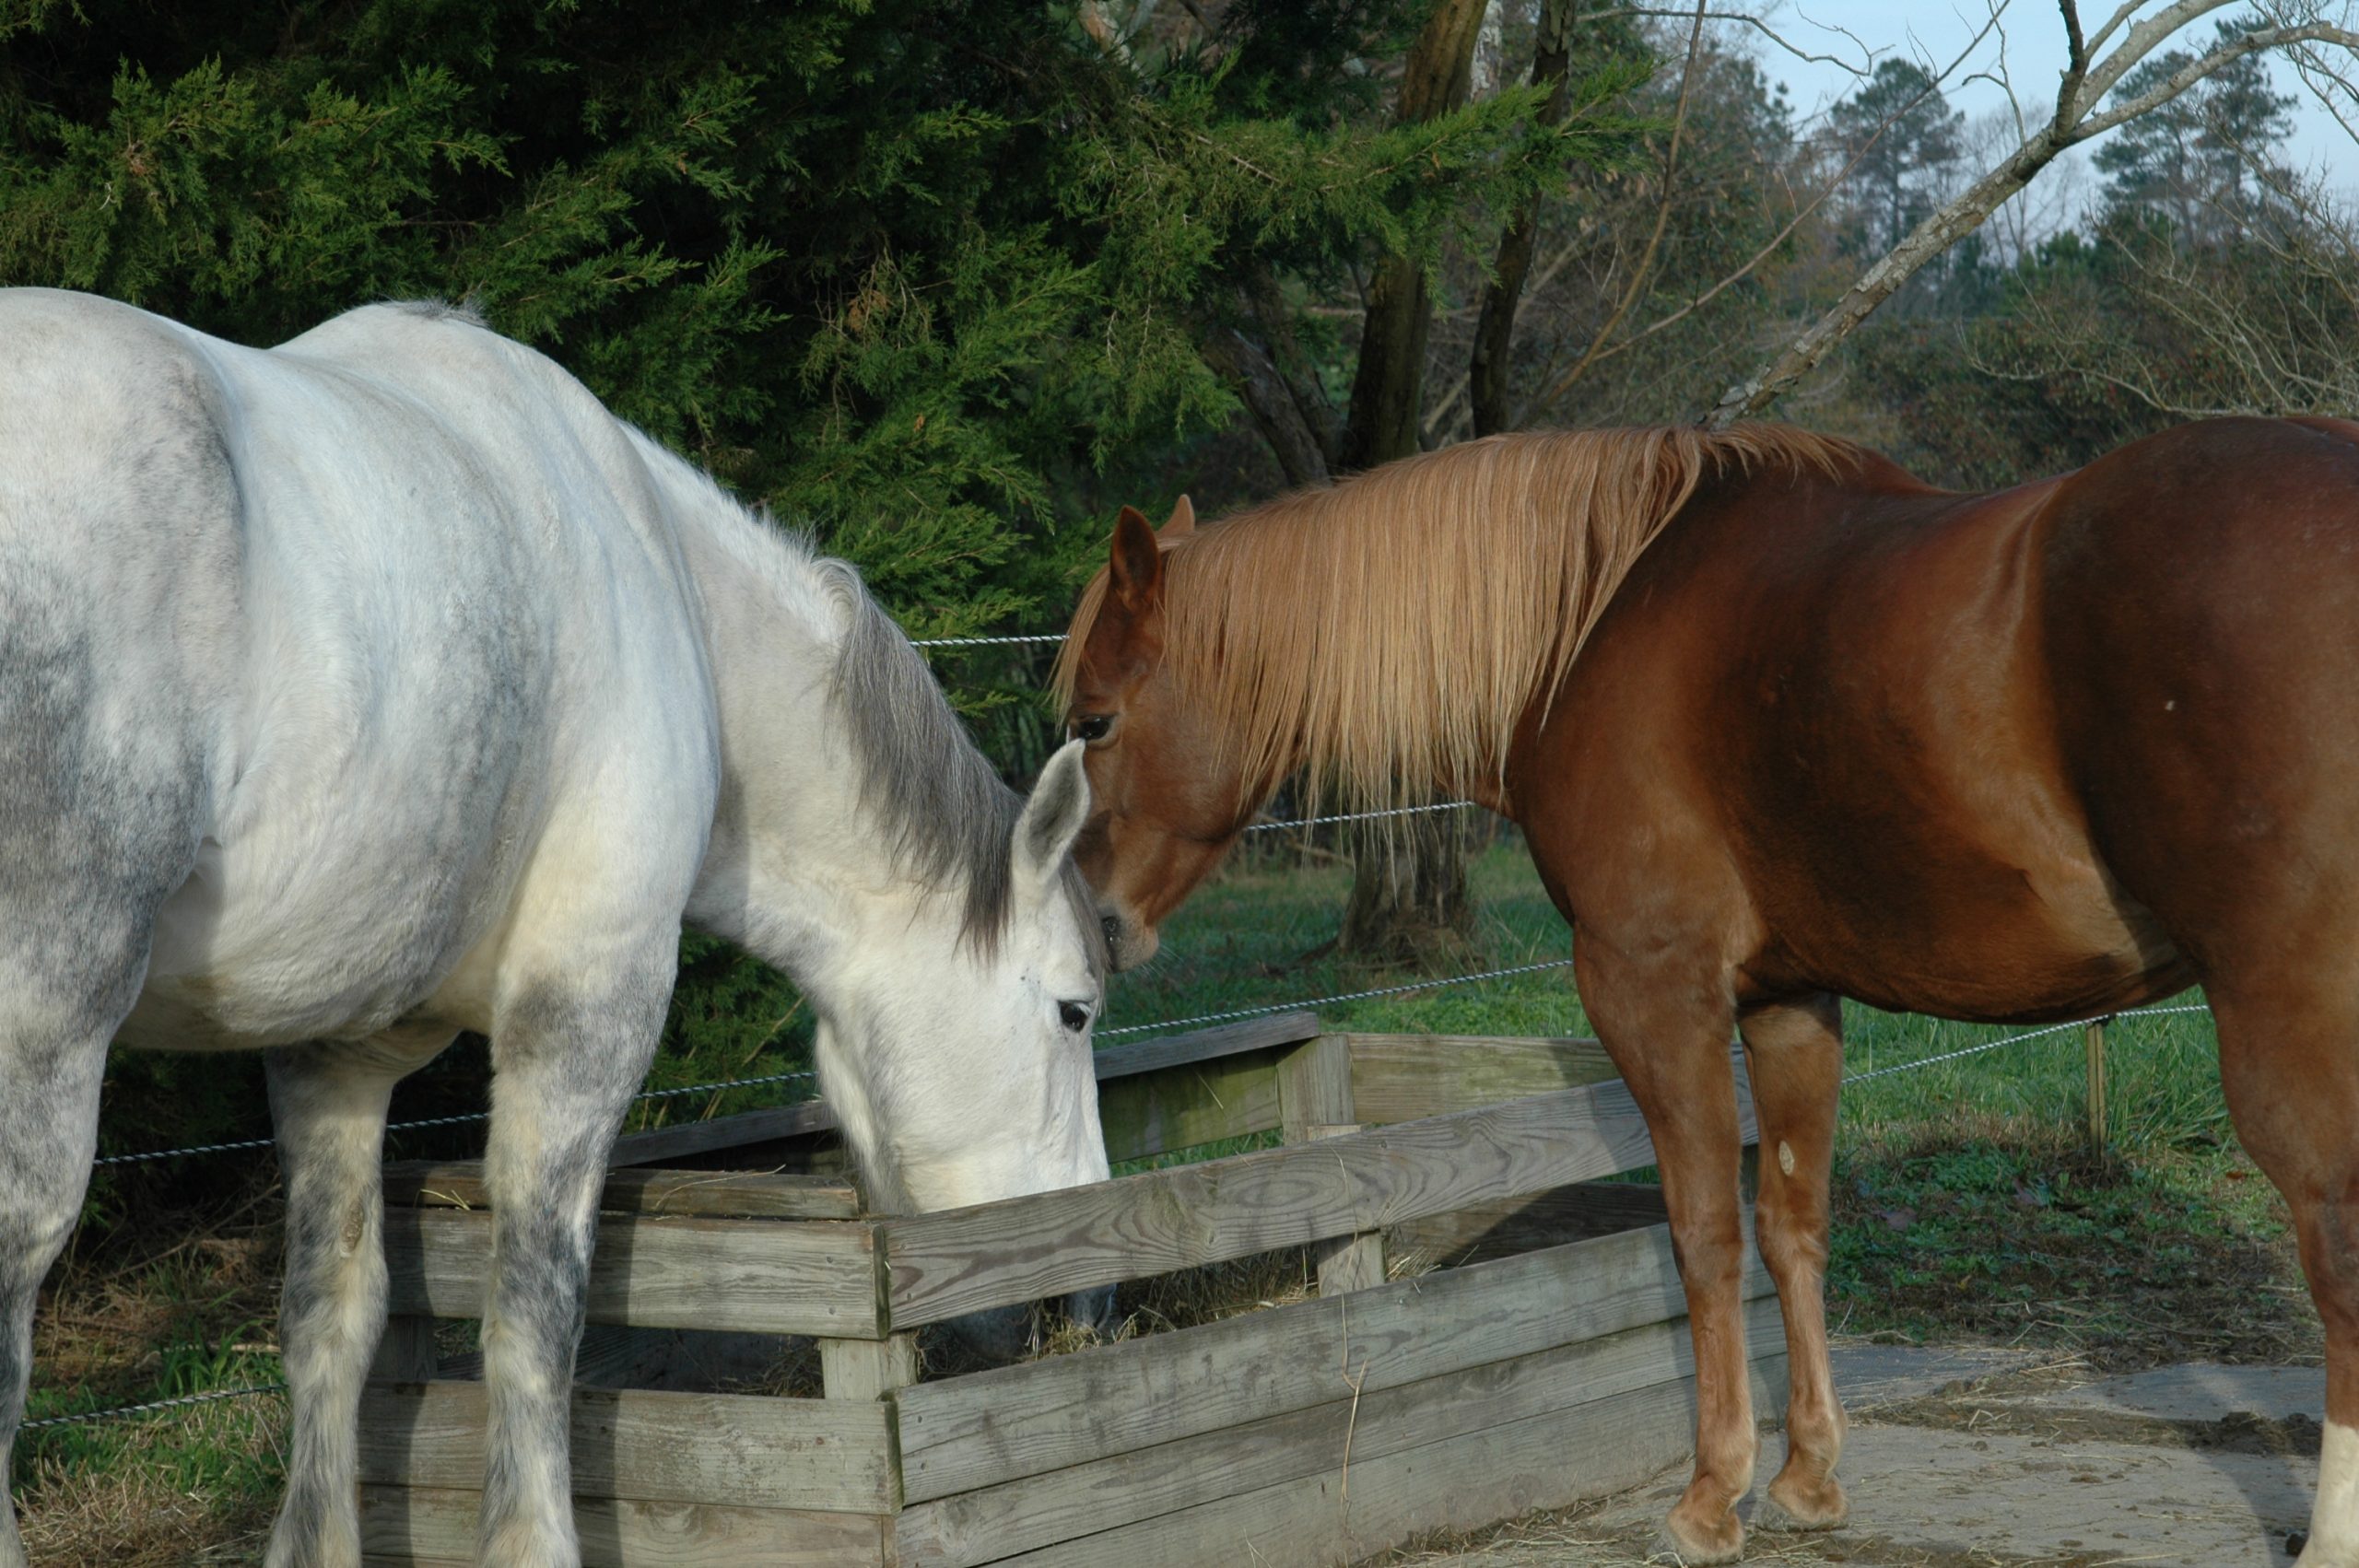 The intersection of horse training and people healing